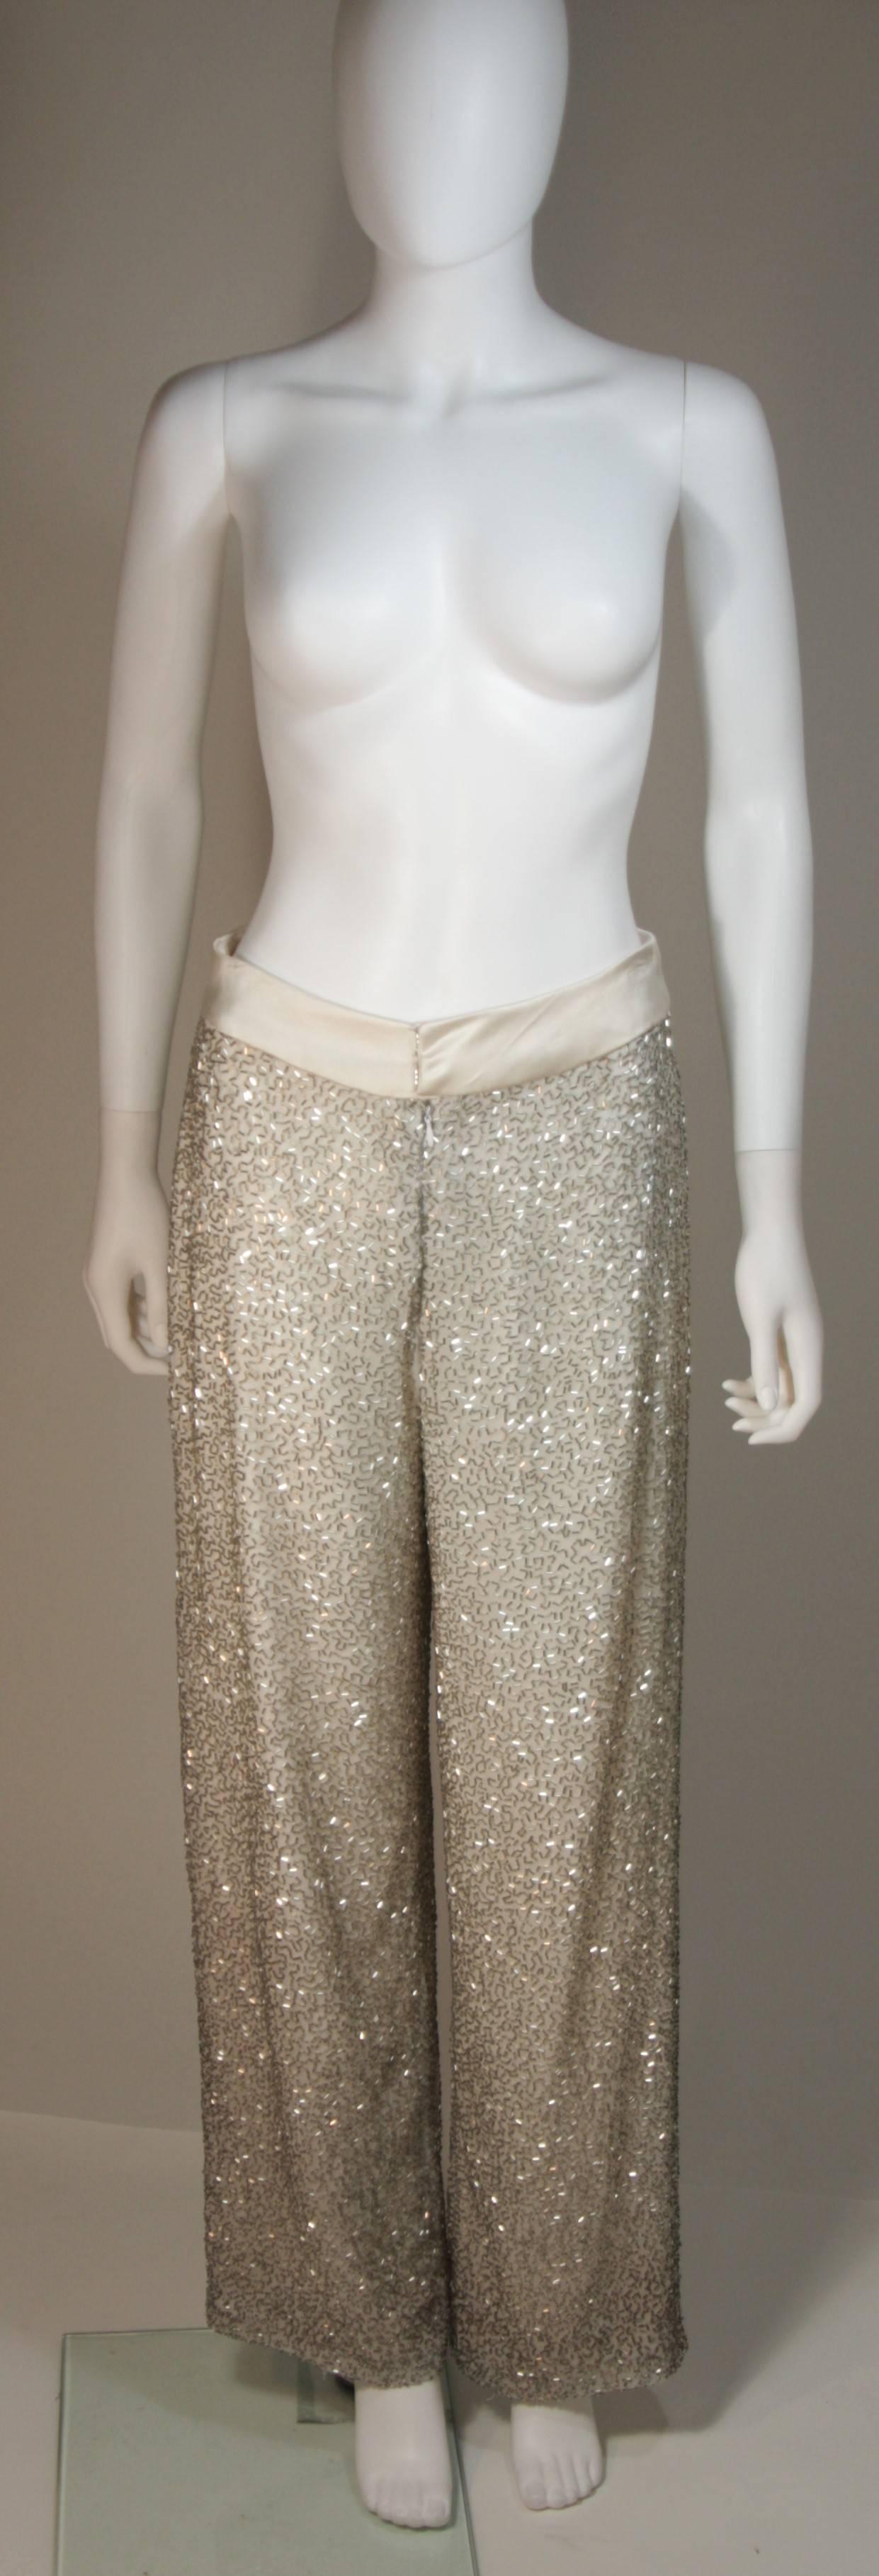 Silver and White Silk Beaded Pant Suit with Palazzo Pants Size Medium Large For Sale 4